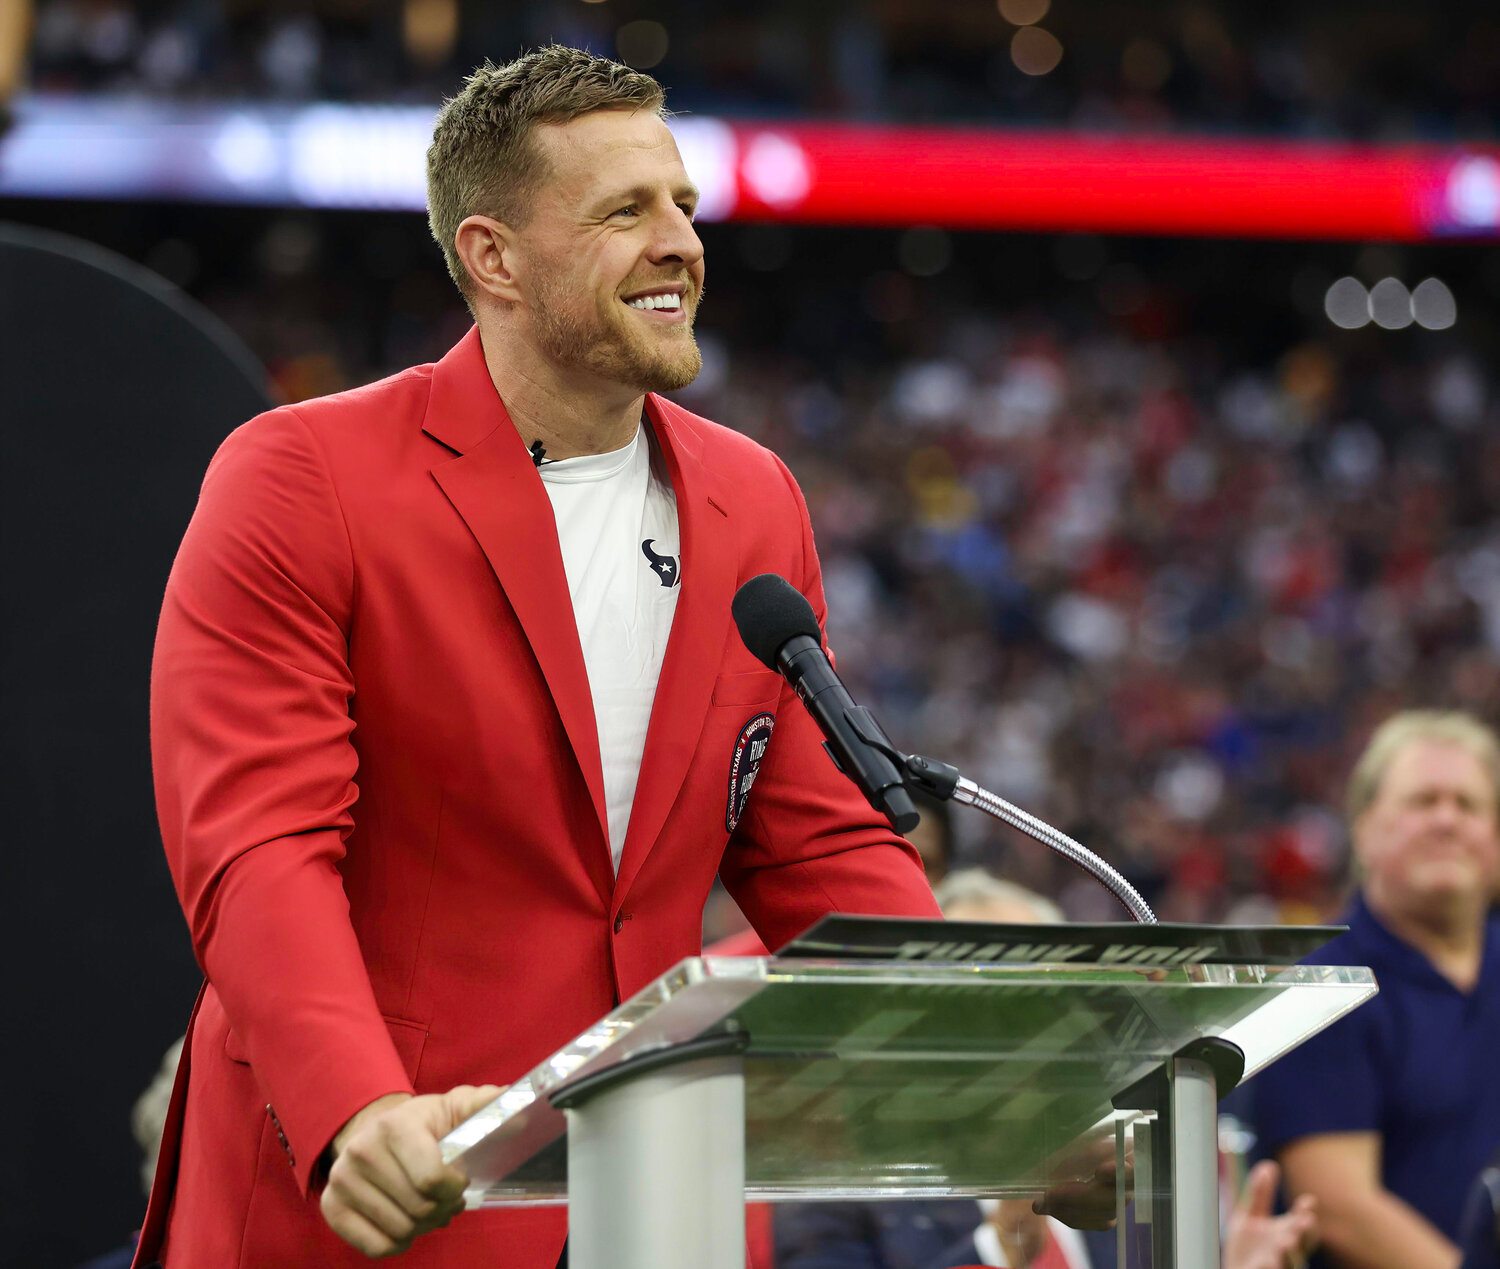 Former Houston Texans player JJ Watt speaks during an induction ceremony to the Texans’ Ring of Honor at halftime during an NFL game between the Texans and the Steelers on October 1, 2023 in Houston.